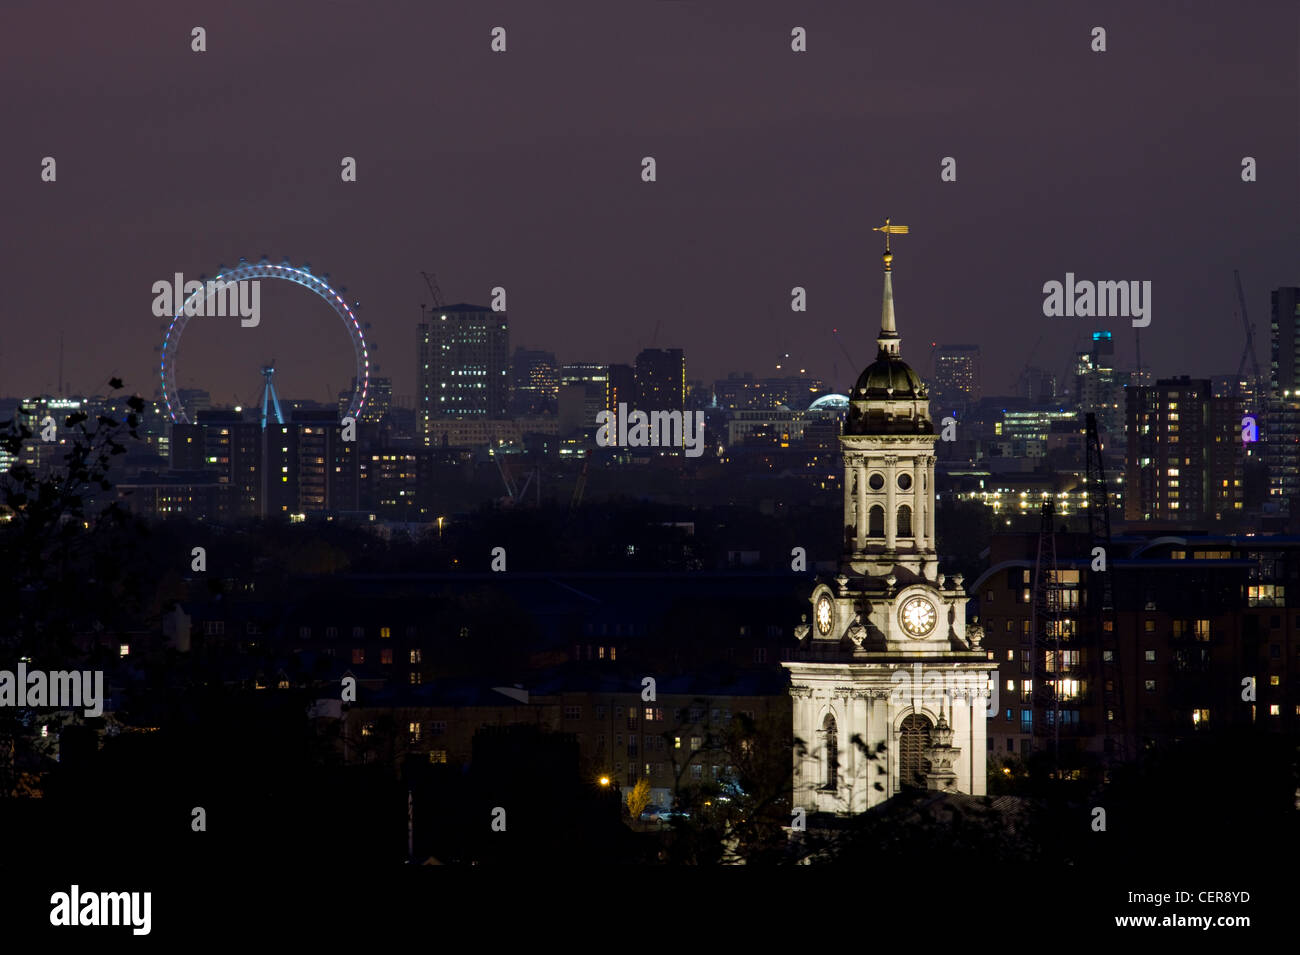 London skyline at night with a stone clock tower and the London Eye on the horizon. Stock Photo